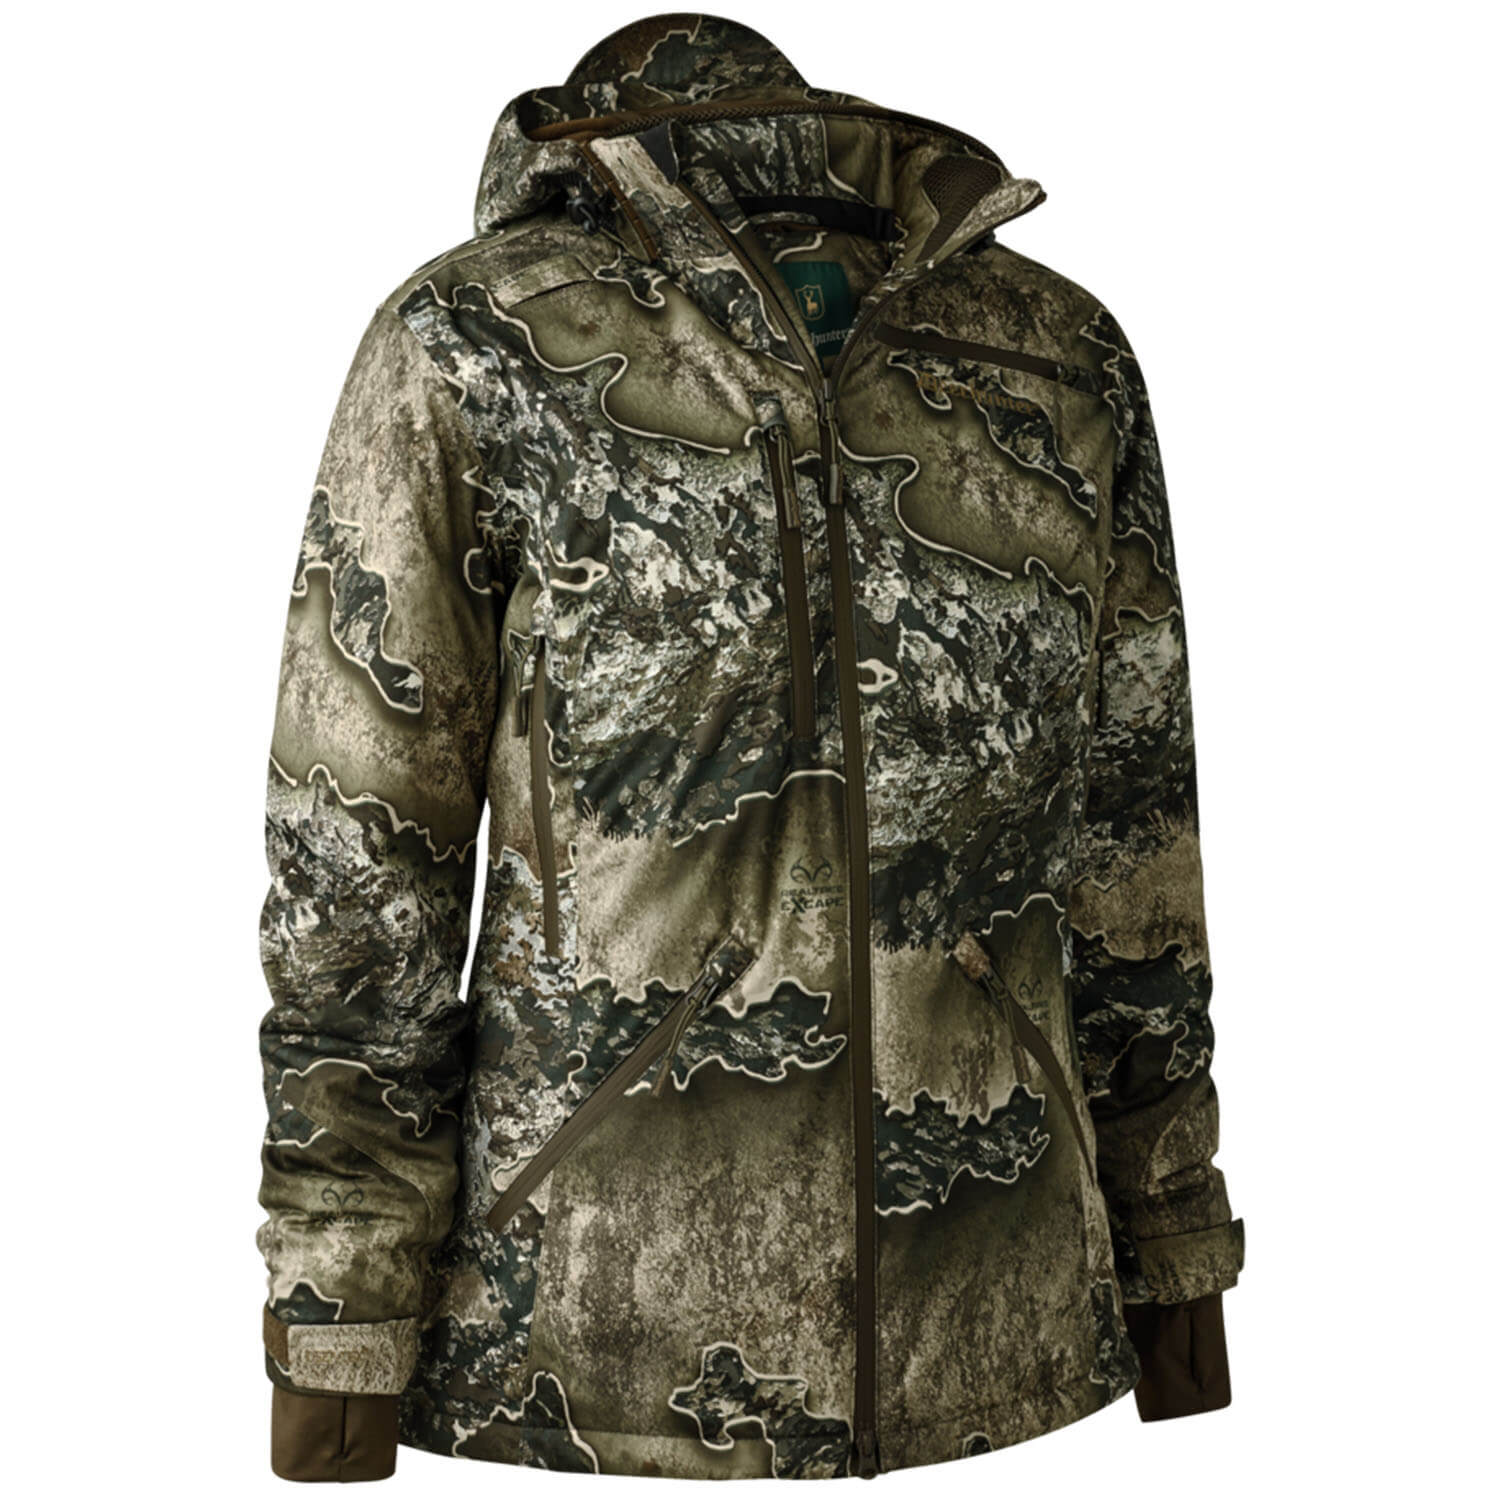 Deerhunter winter jacket Lady Excape (realtree excape) - Hunting Jackets